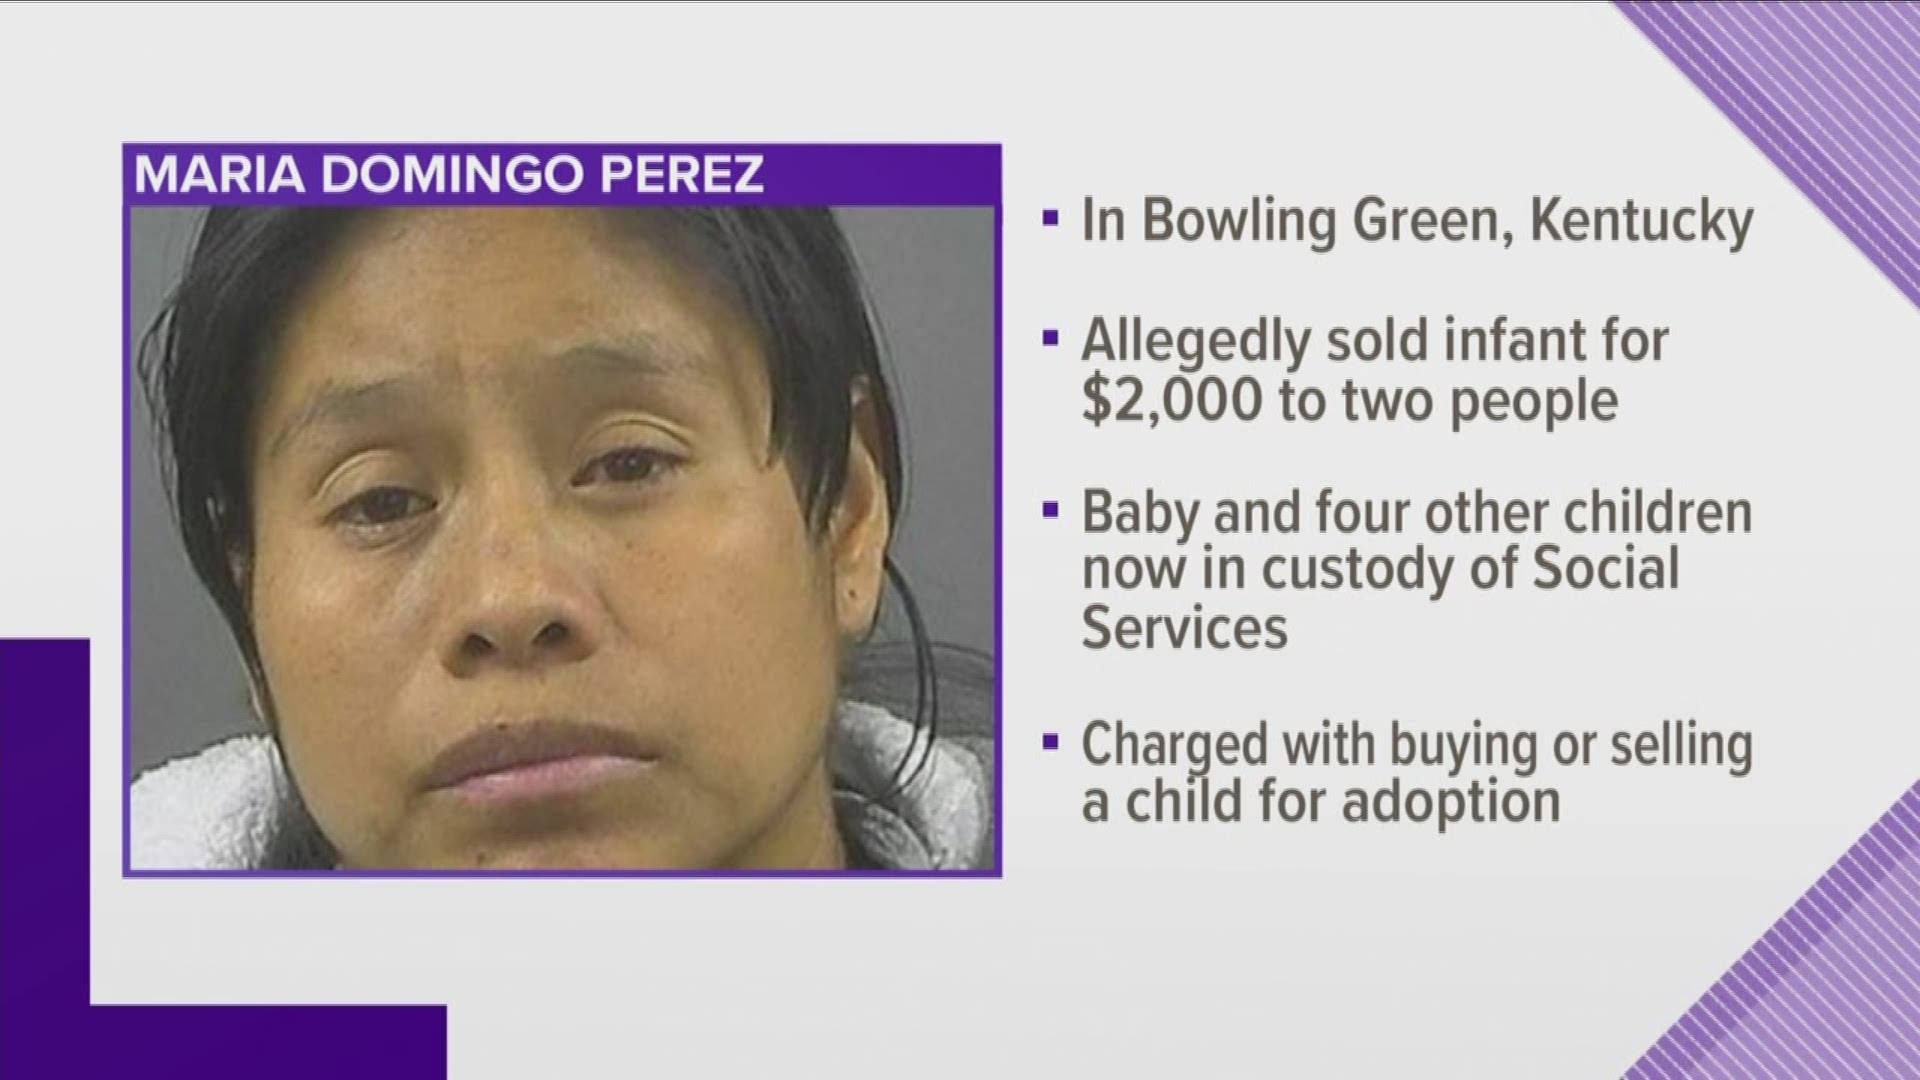 The couple paid the mother $2,000 for the infant, according to police.